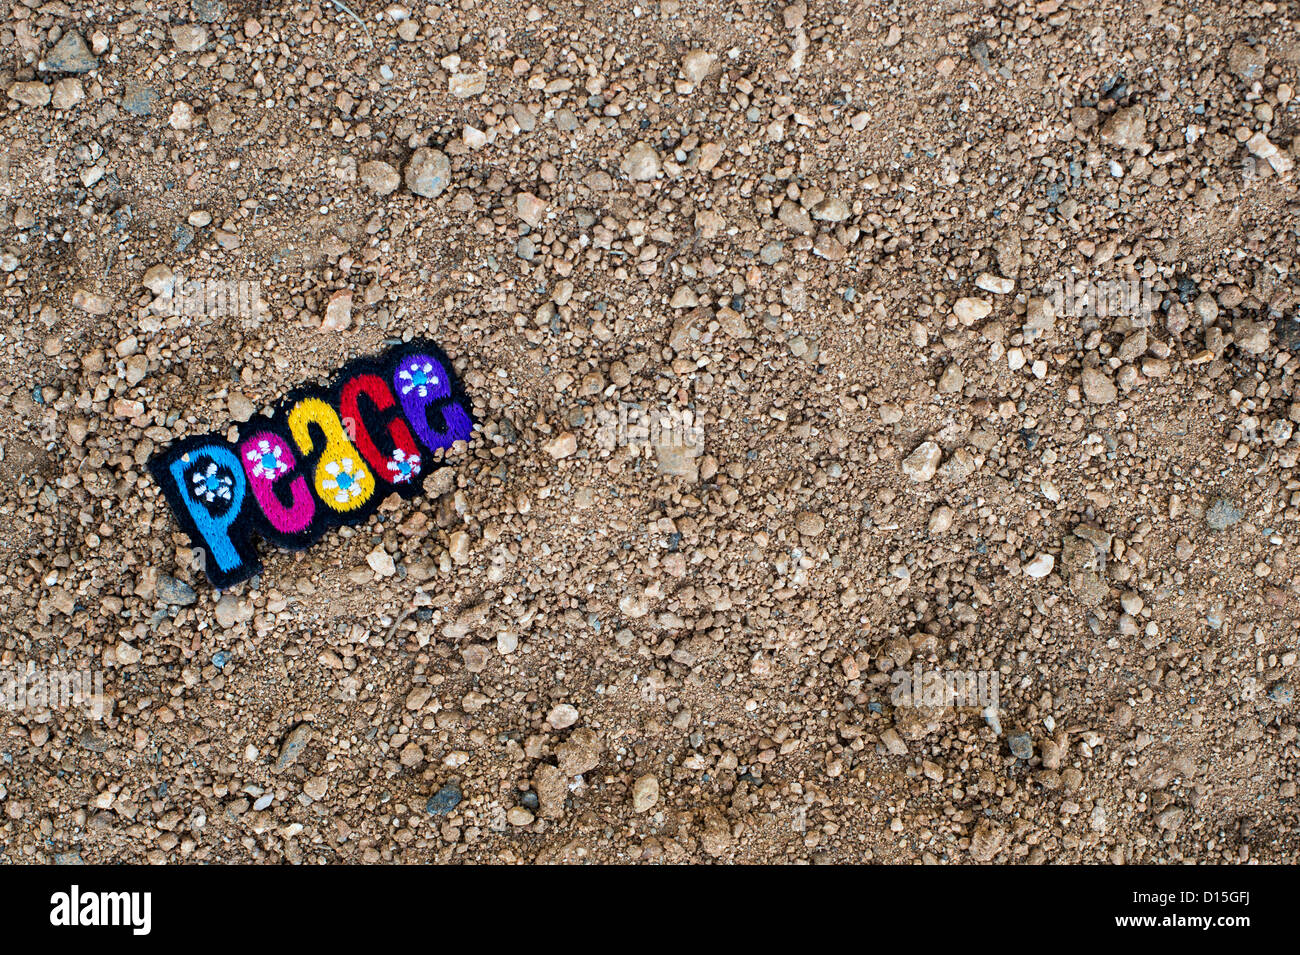 Multicoloured embroidery PEACE patch on a dirt track. India Stock Photo